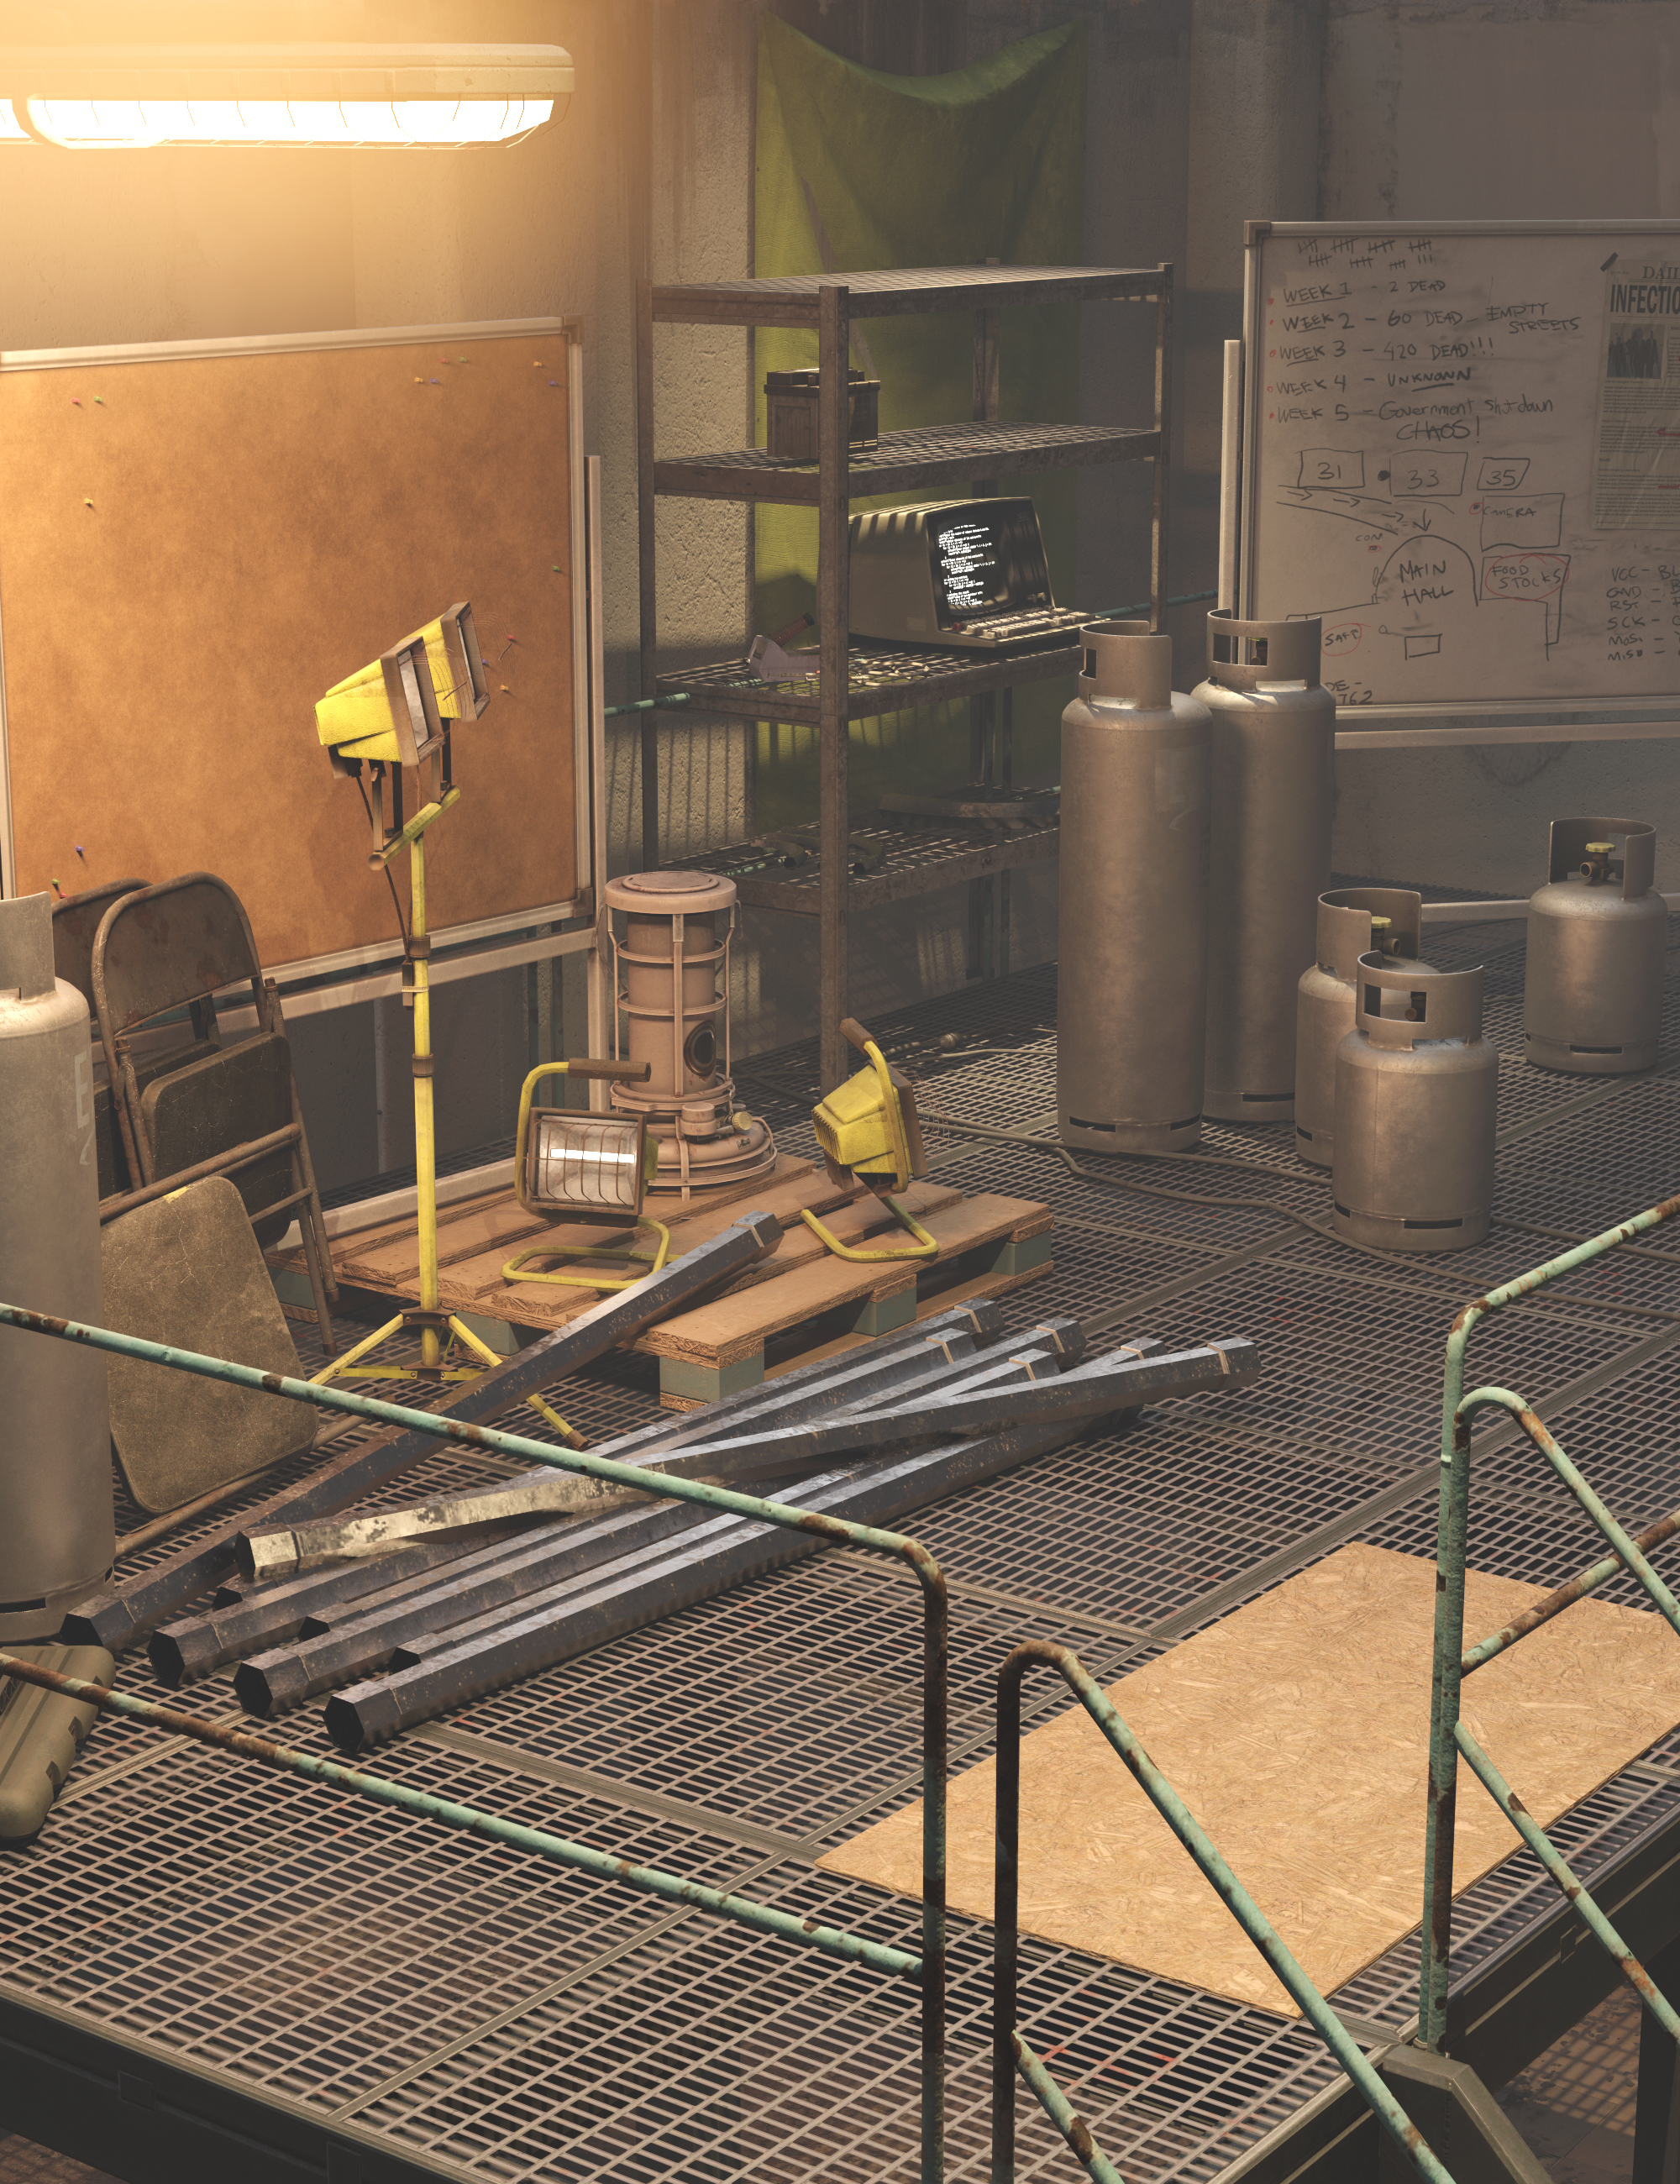 The Safe House Tools and Misc Props